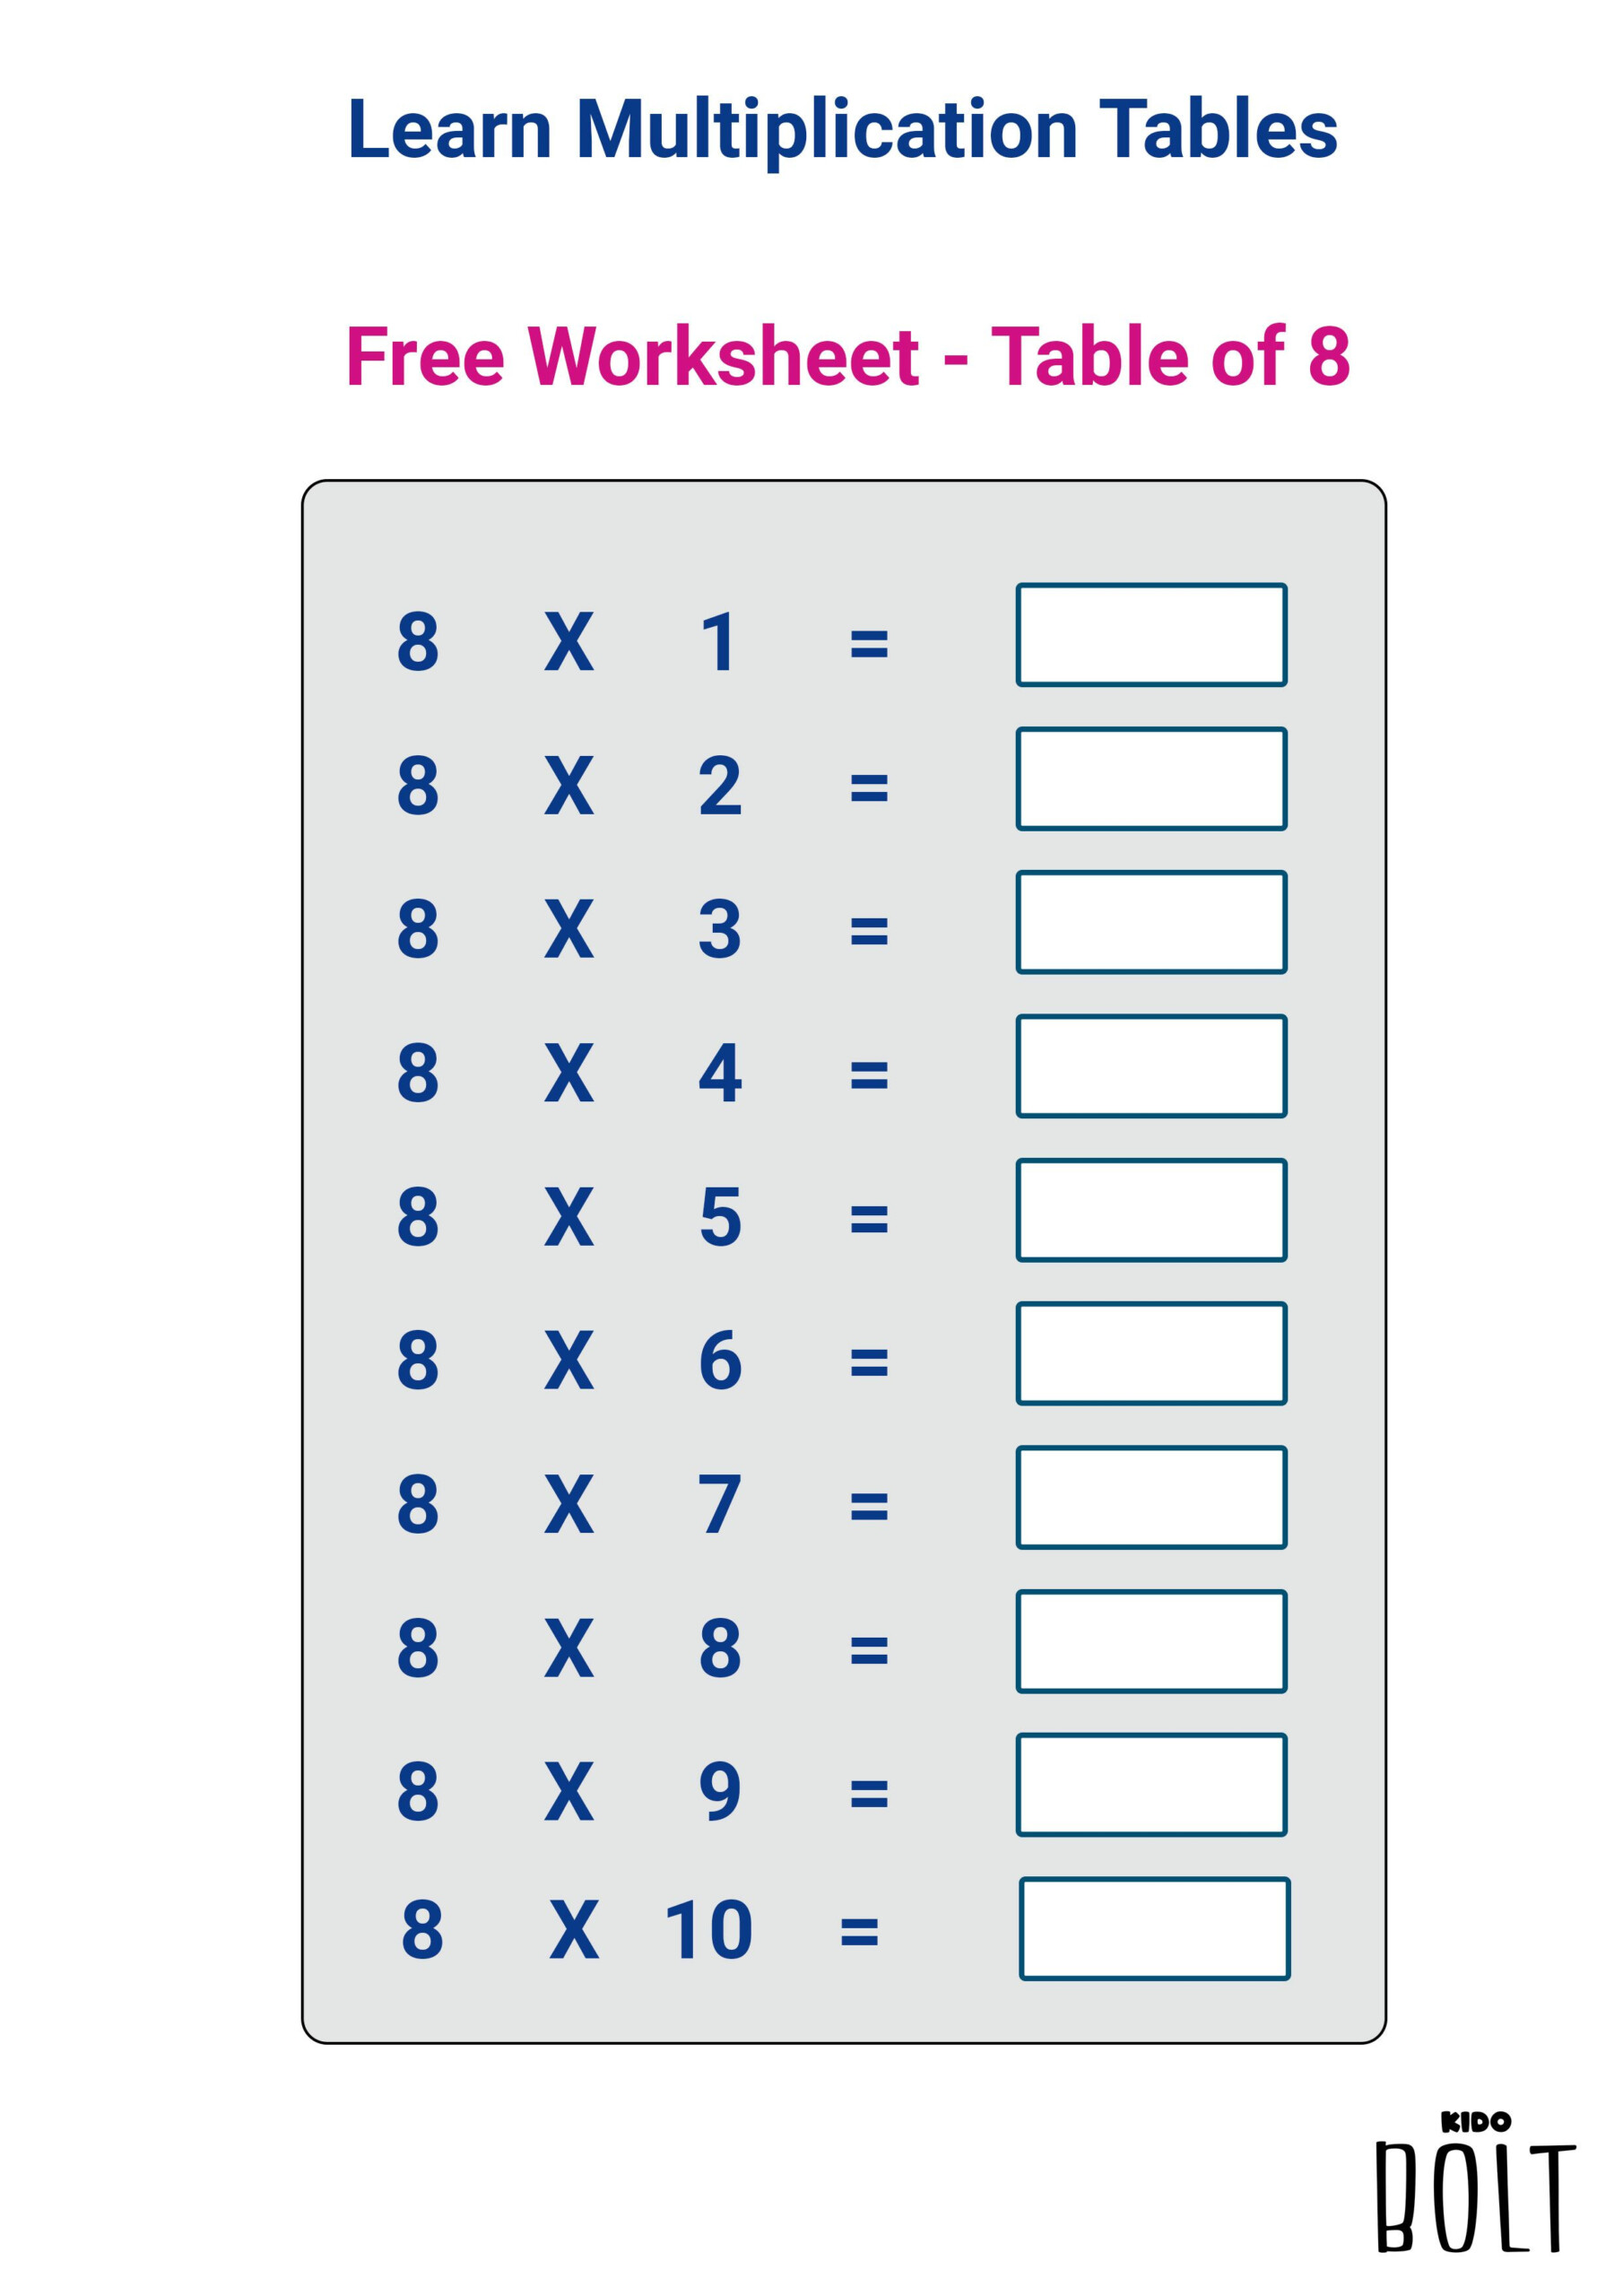 Free Printable Worksheet That Can Focus On Learning in Printable Multiplication Worksheets 7's And 8's